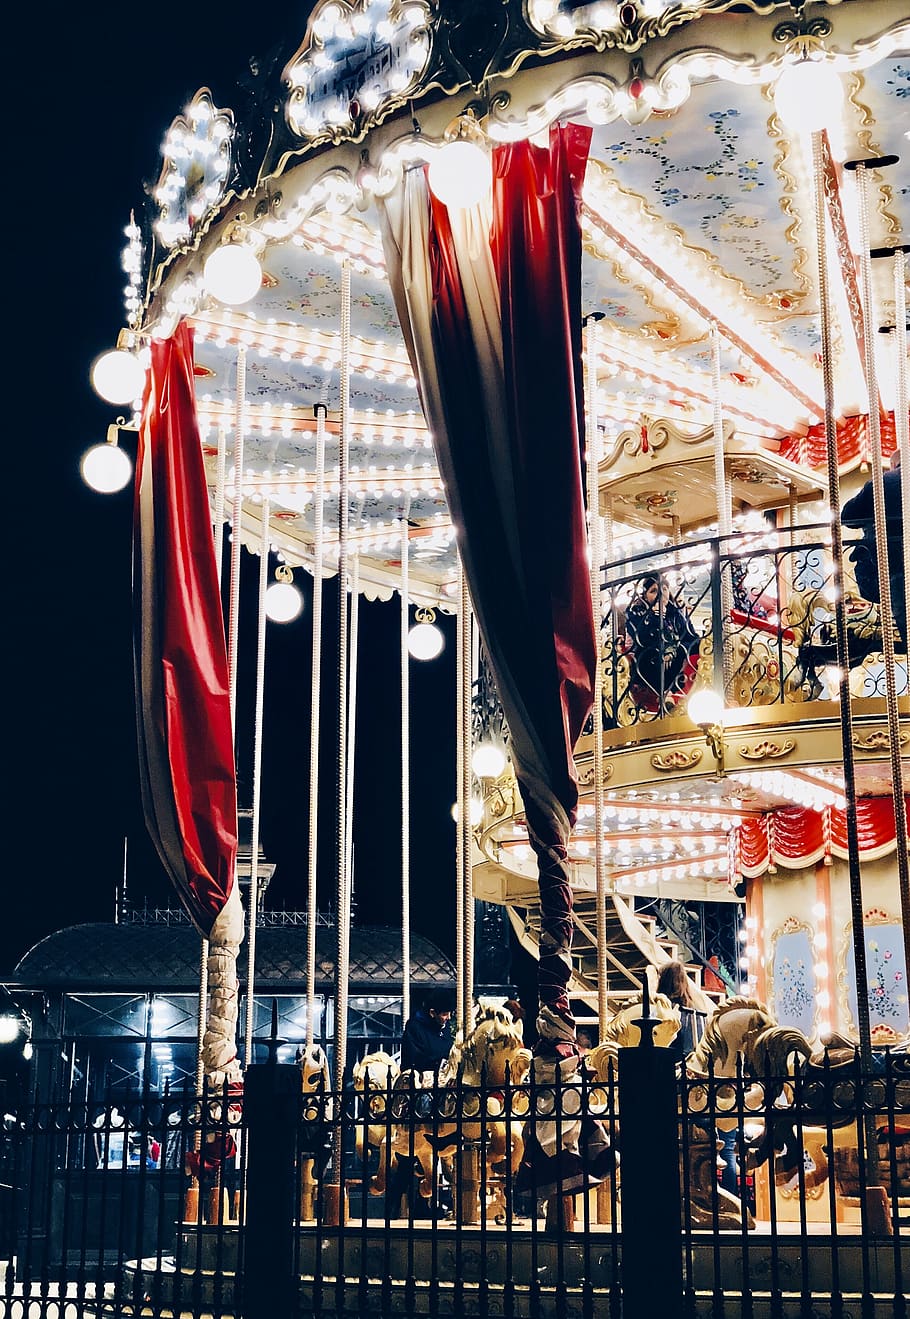 carousel, attraction, entertainment, fun, hanging, variation, choice, retail, large group of objects, low angle view